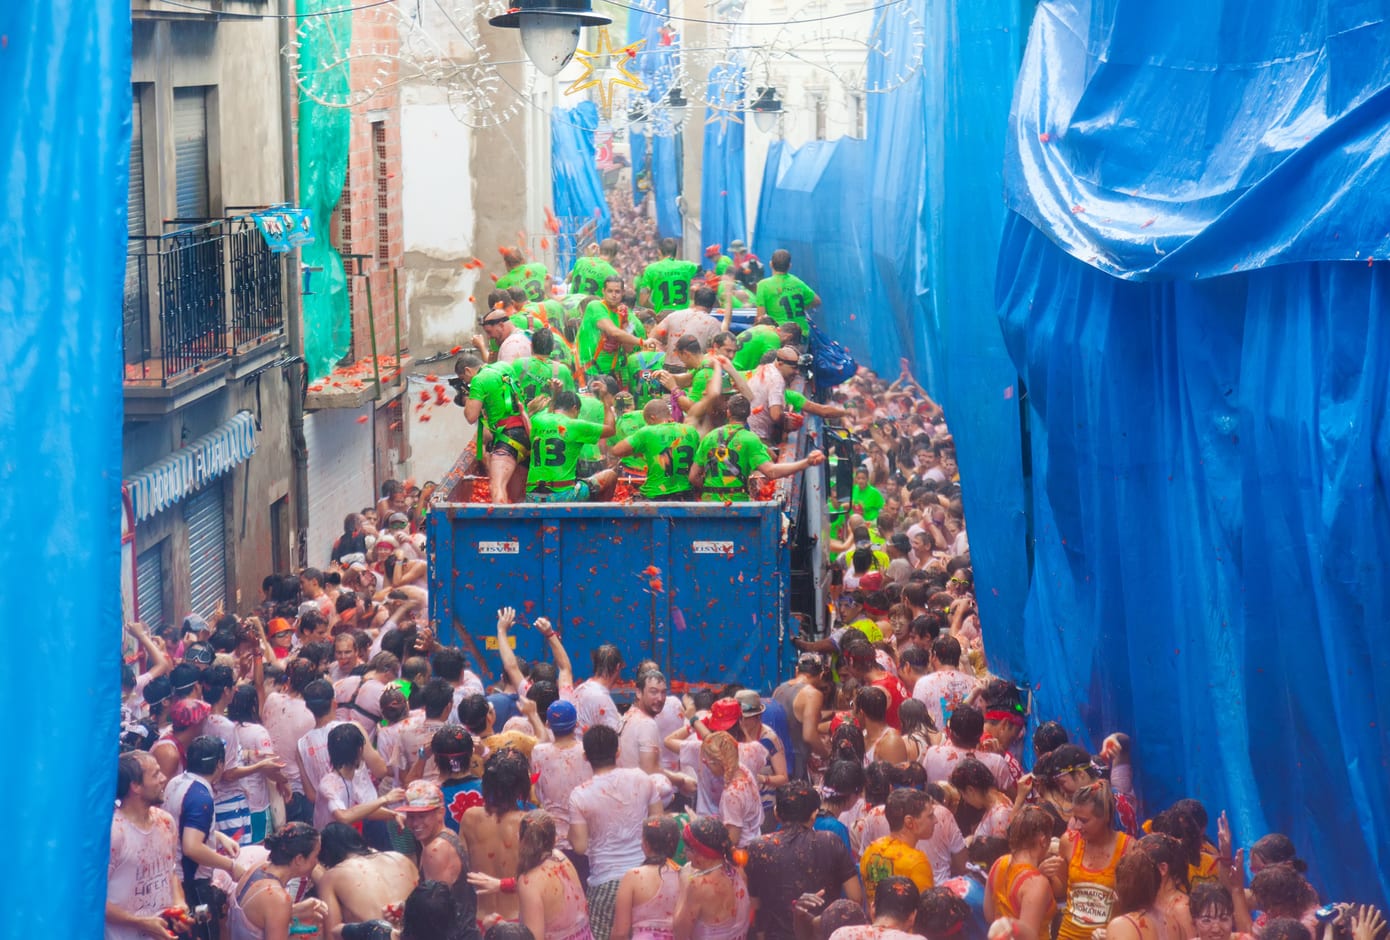 Battle of tomatoes during La Tomatina festival, in Spain.